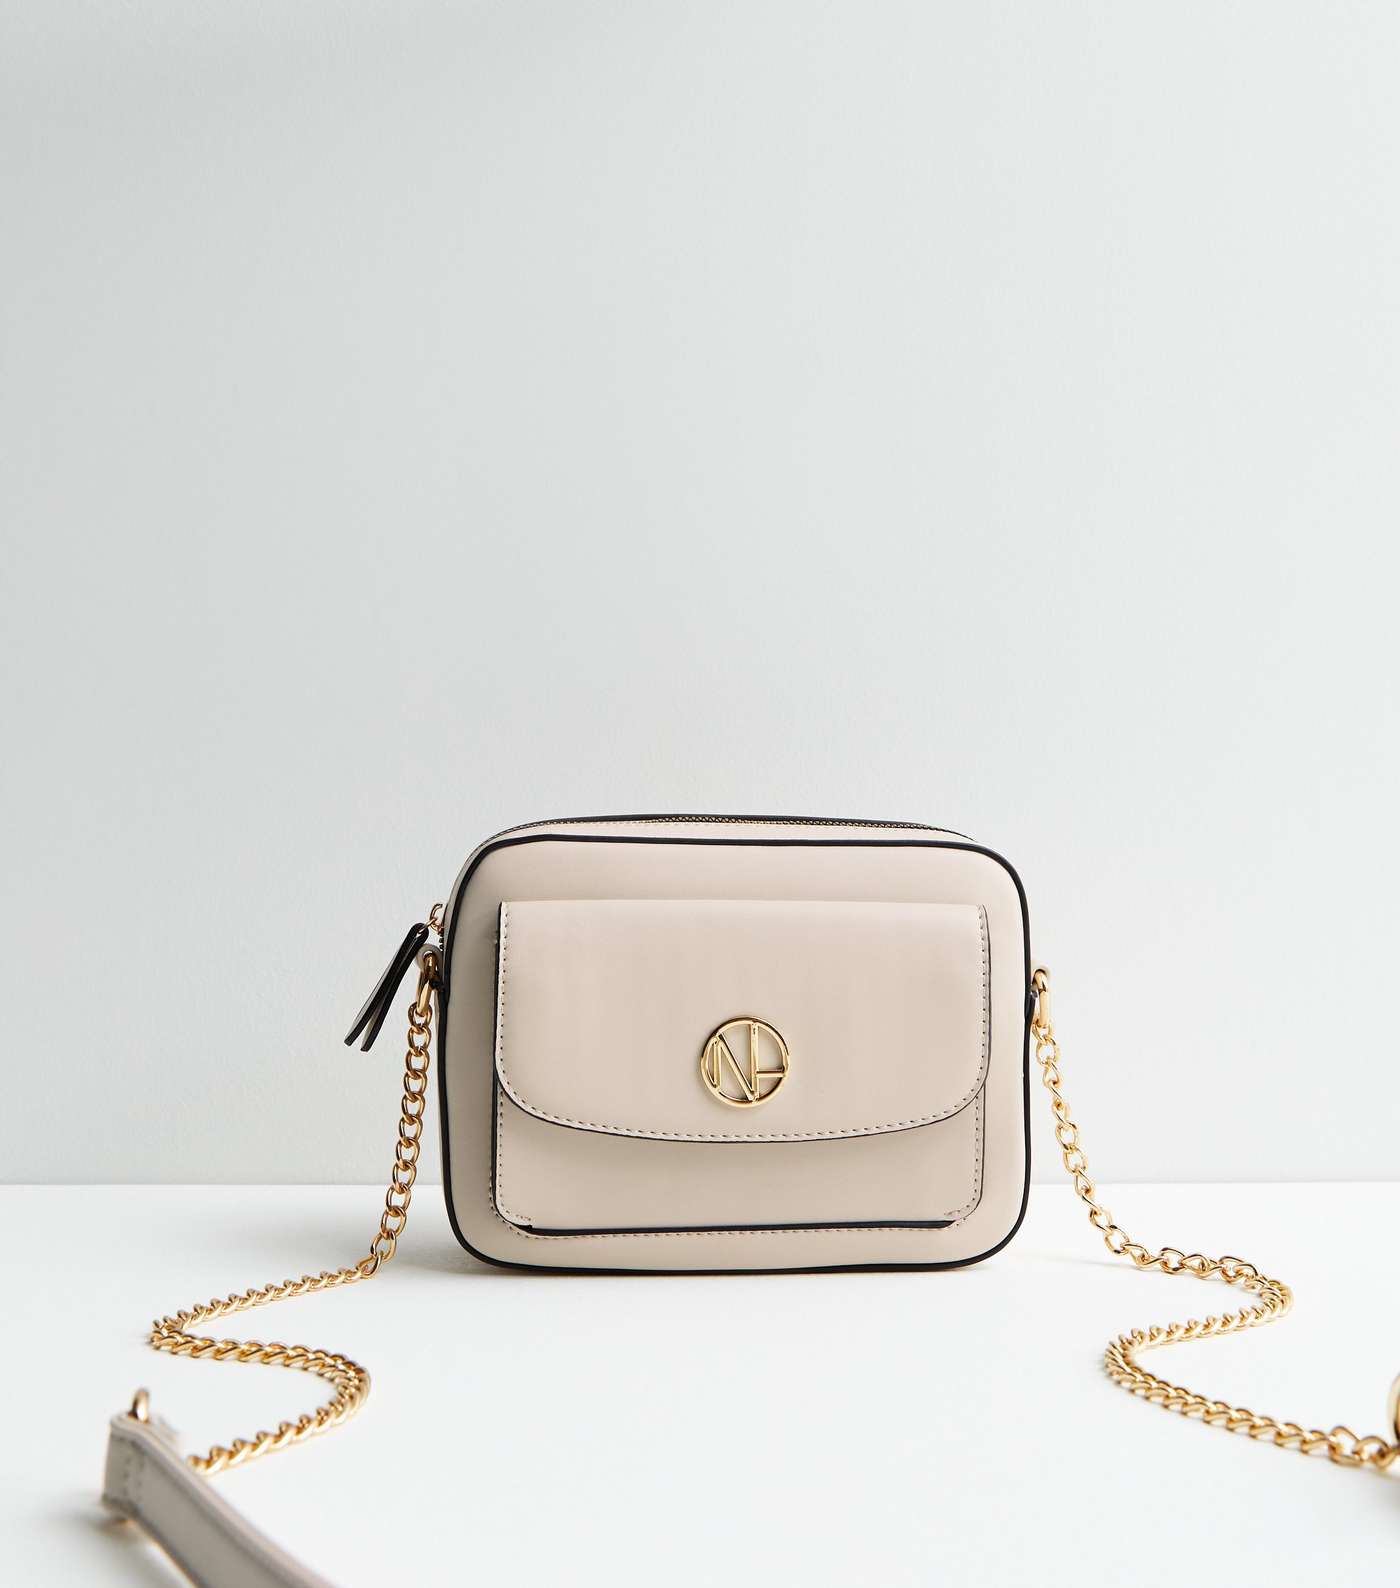 Cream Leather-Look Pocket Front Cross Body Bag